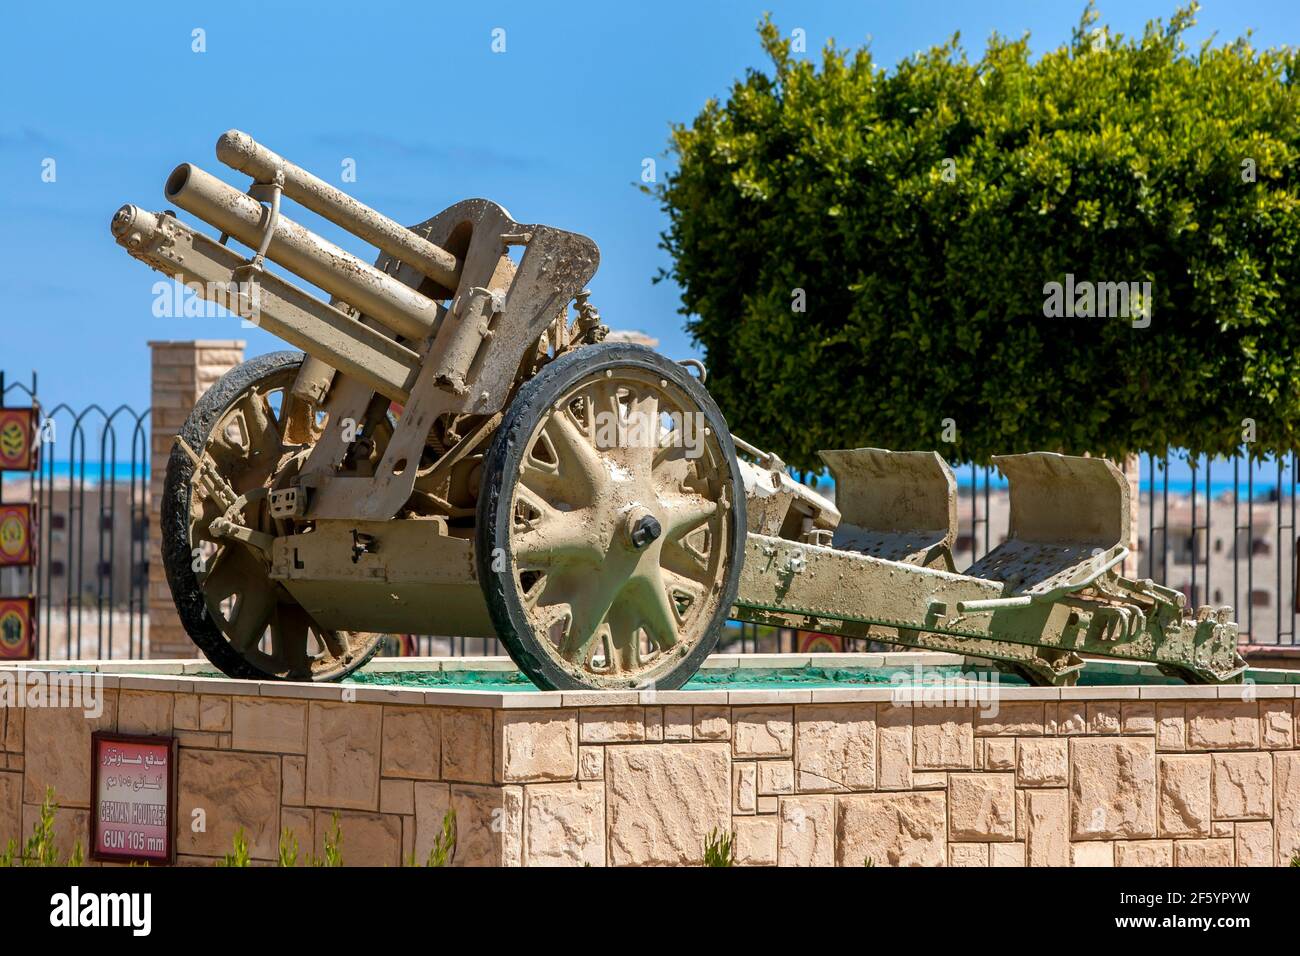 A German Howitzer Gun 105 MM on display at the El Alamein War Museum in northern Egypt. This gun was used during the Western Desert campaign of WW2. Stock Photo